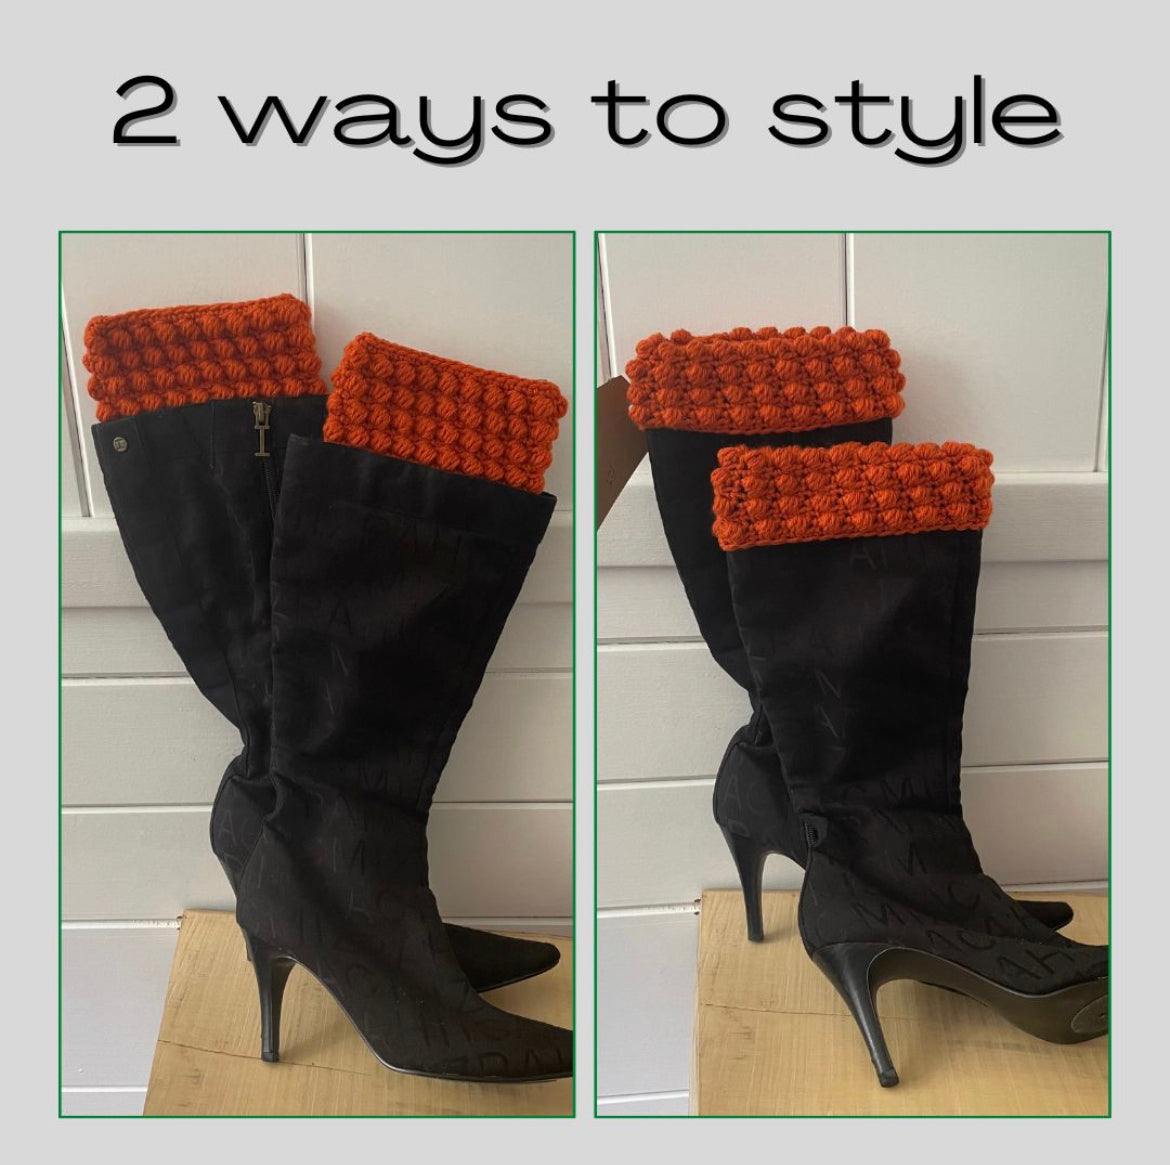 Boot Cuffs in Cinnamon Puff Stitch 11.5" Hand Crocheted Knit Fall Winter Hiking Indoor Outdoor Cozy Brown Orange